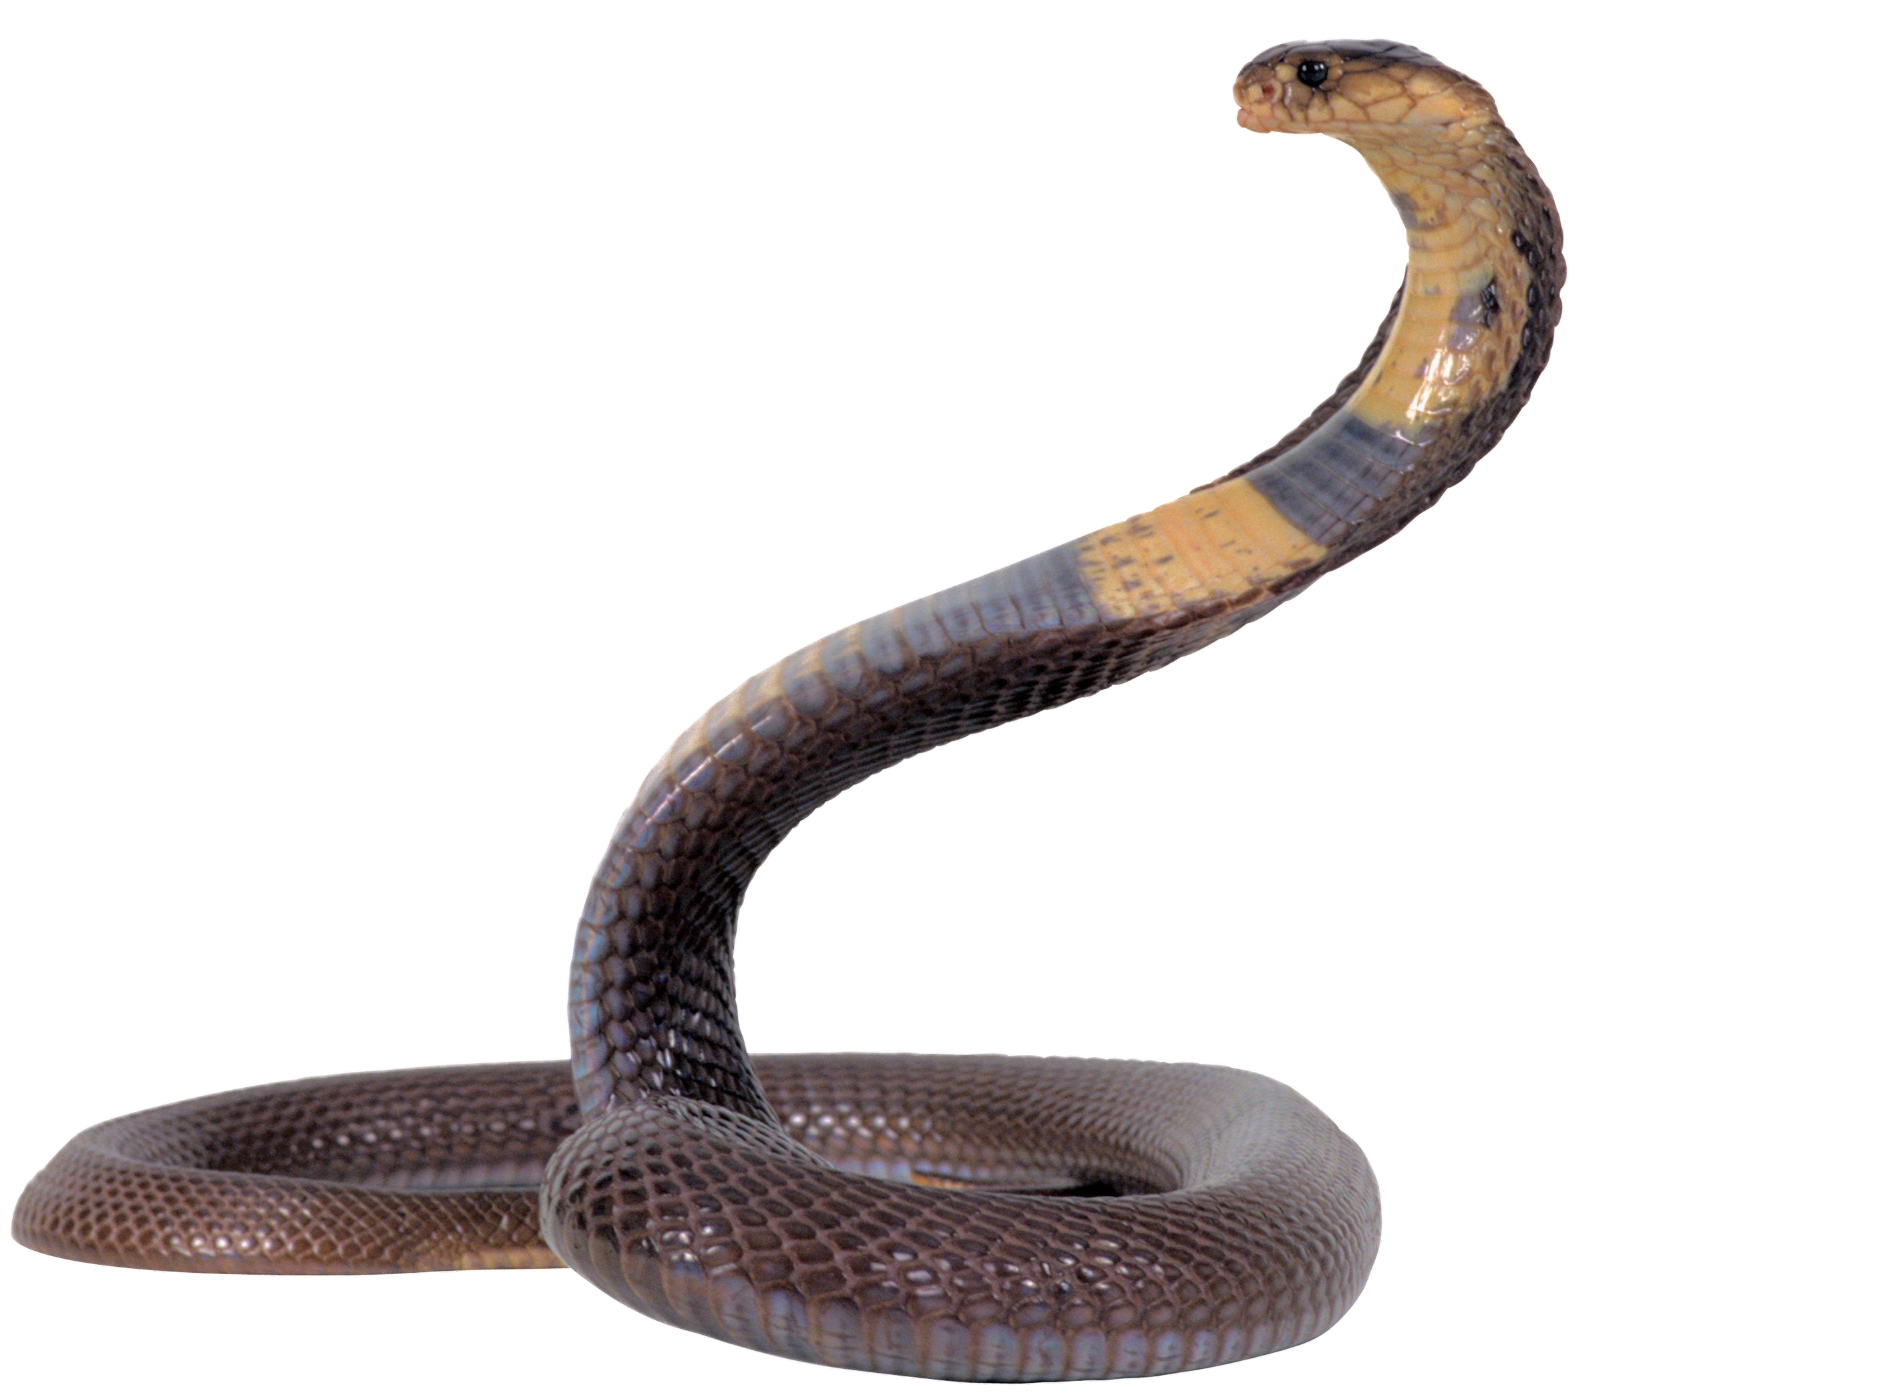 snake-png-image-pngfre-8